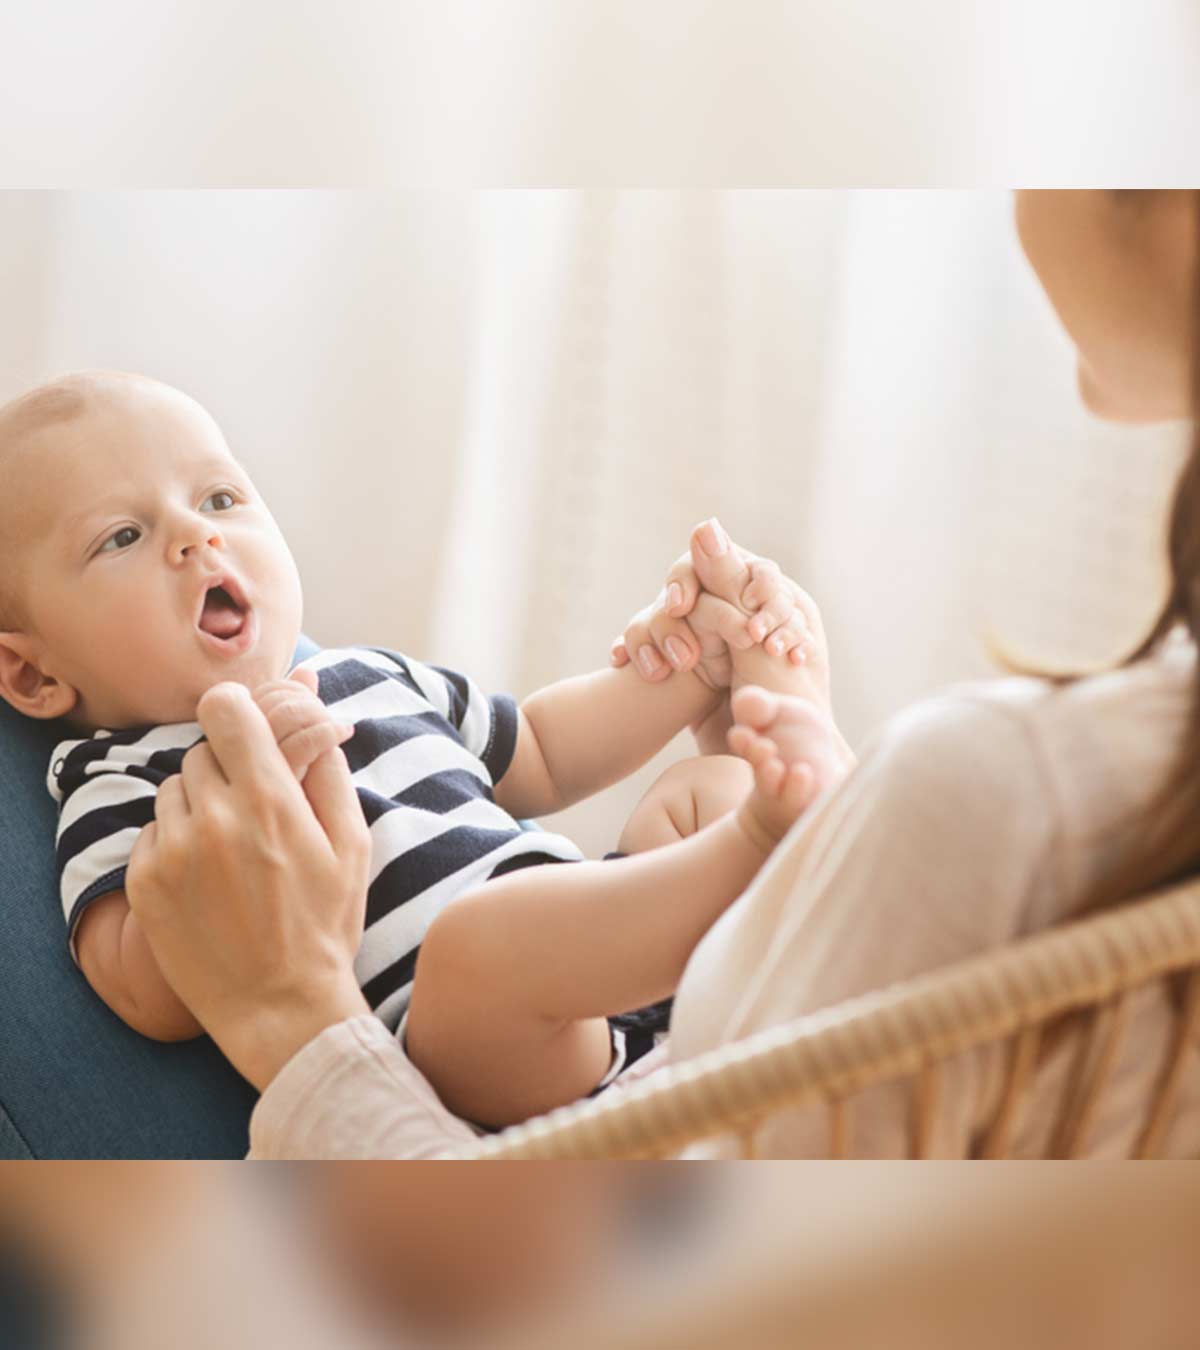 Understanding What Your Baby’s First Sounds Mean